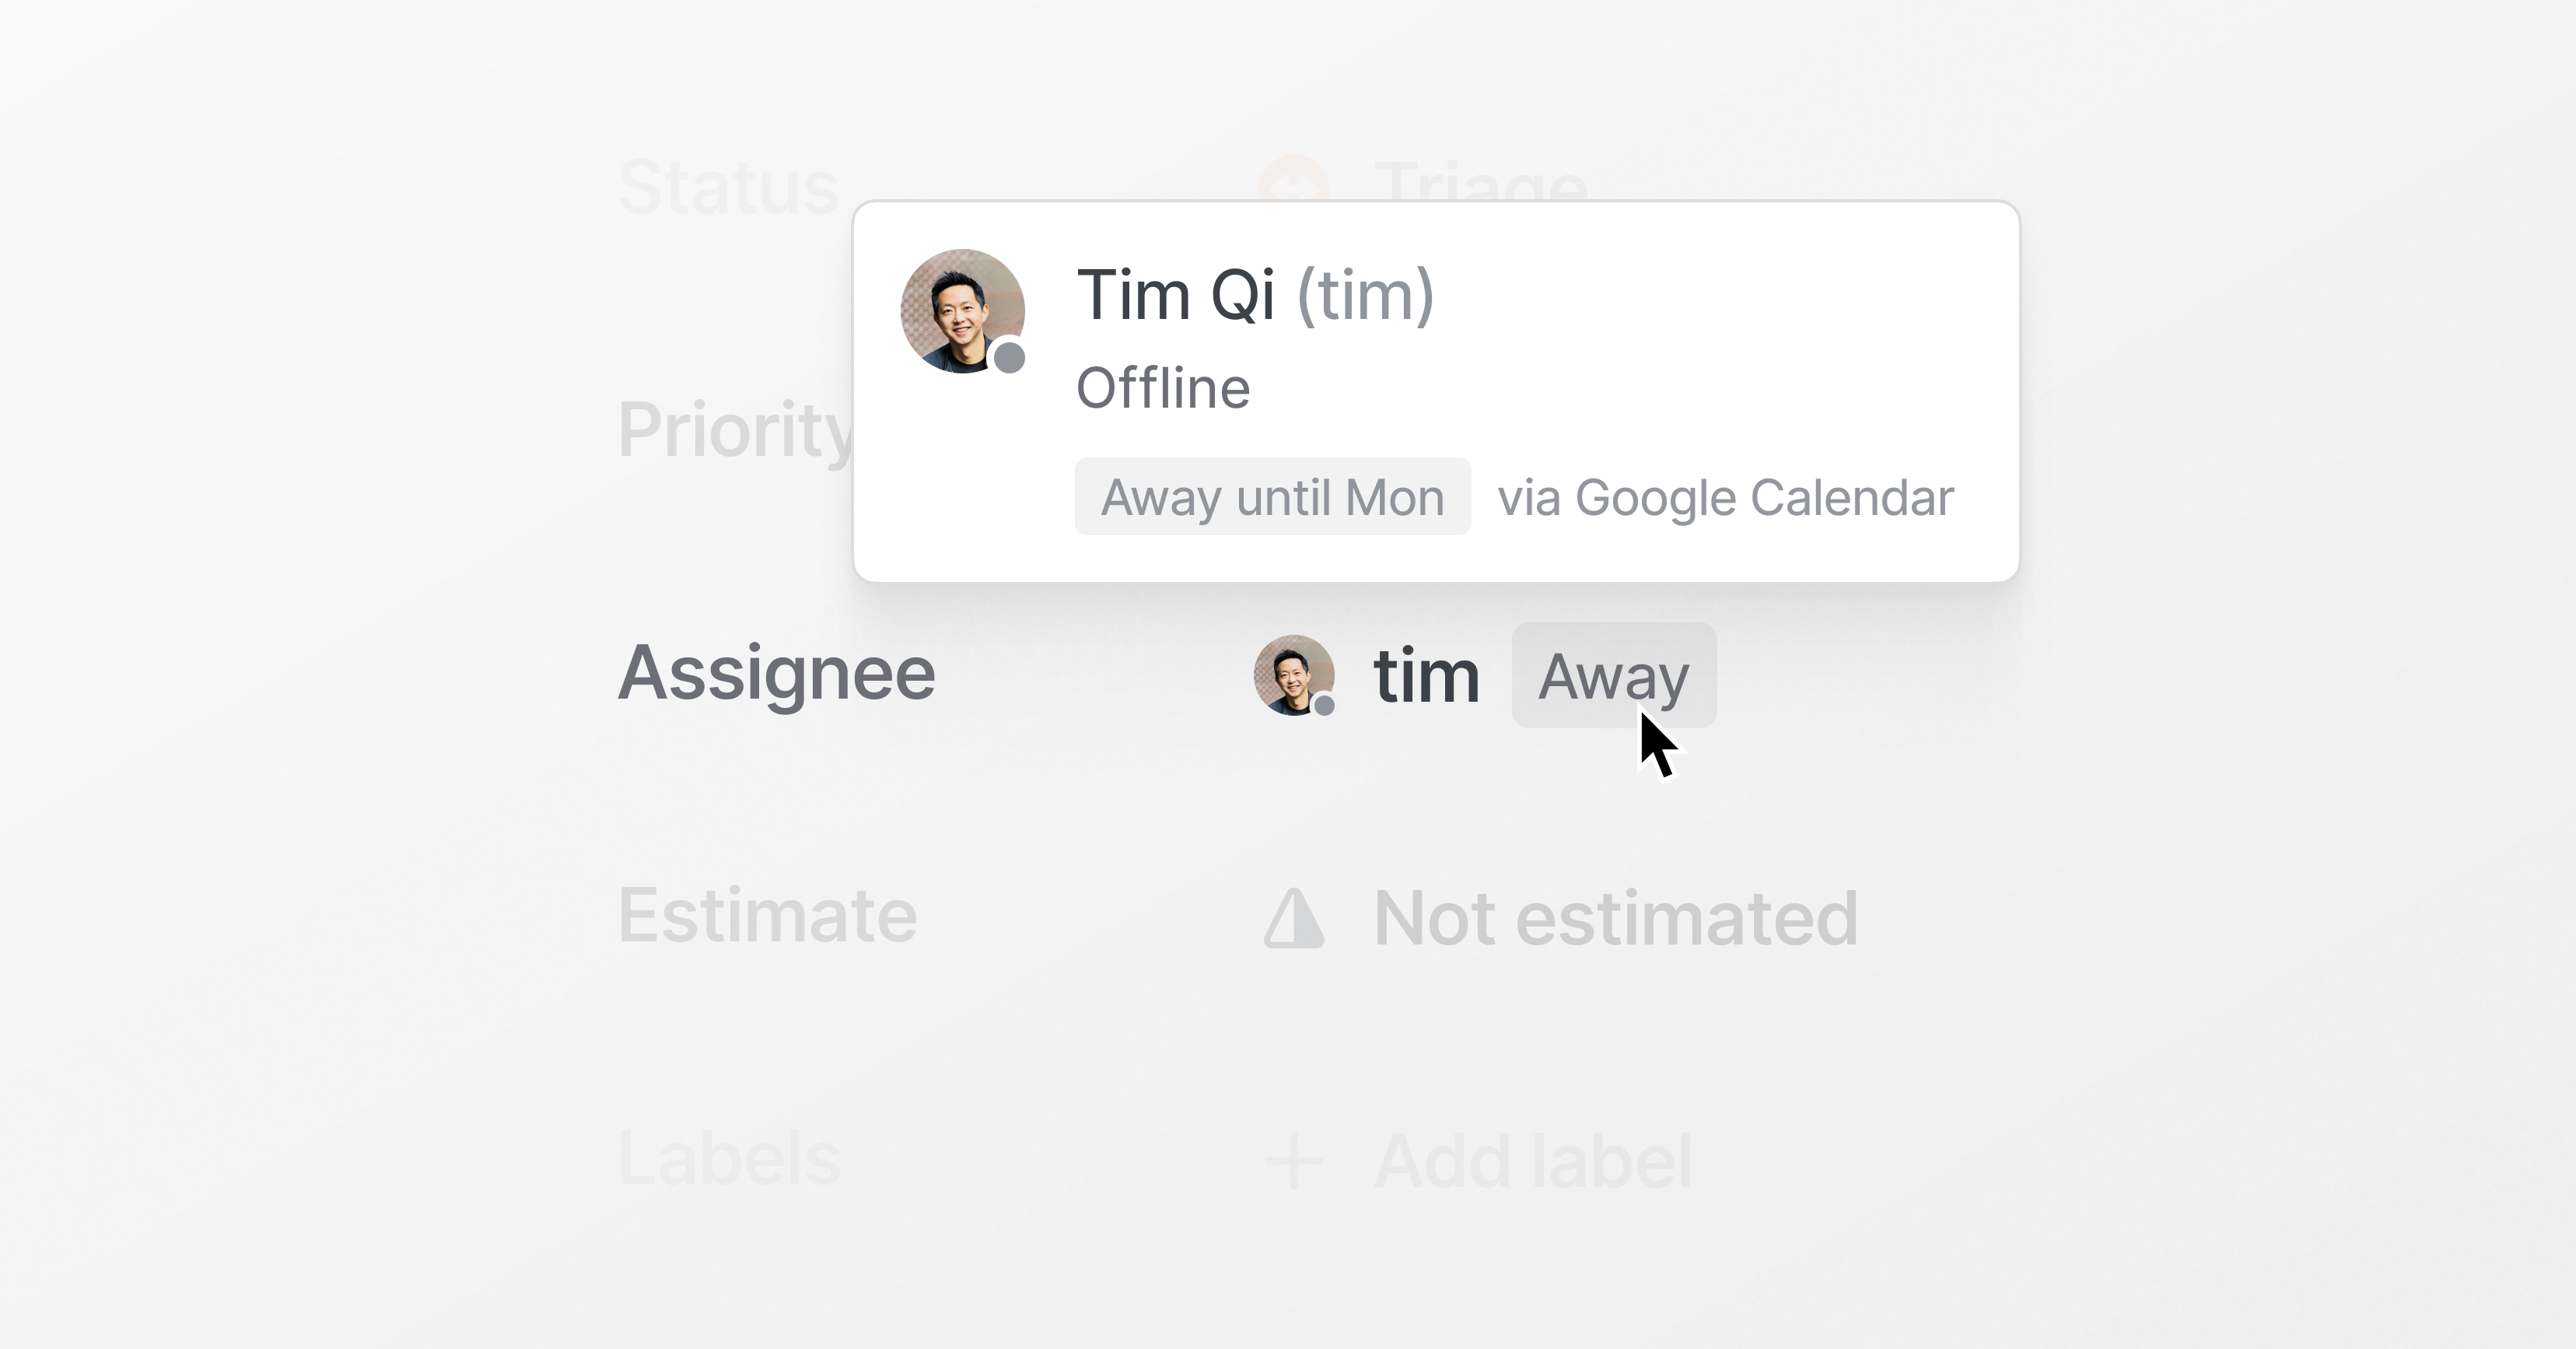 Issue sidebar showing the assignee Tim is away until Monday